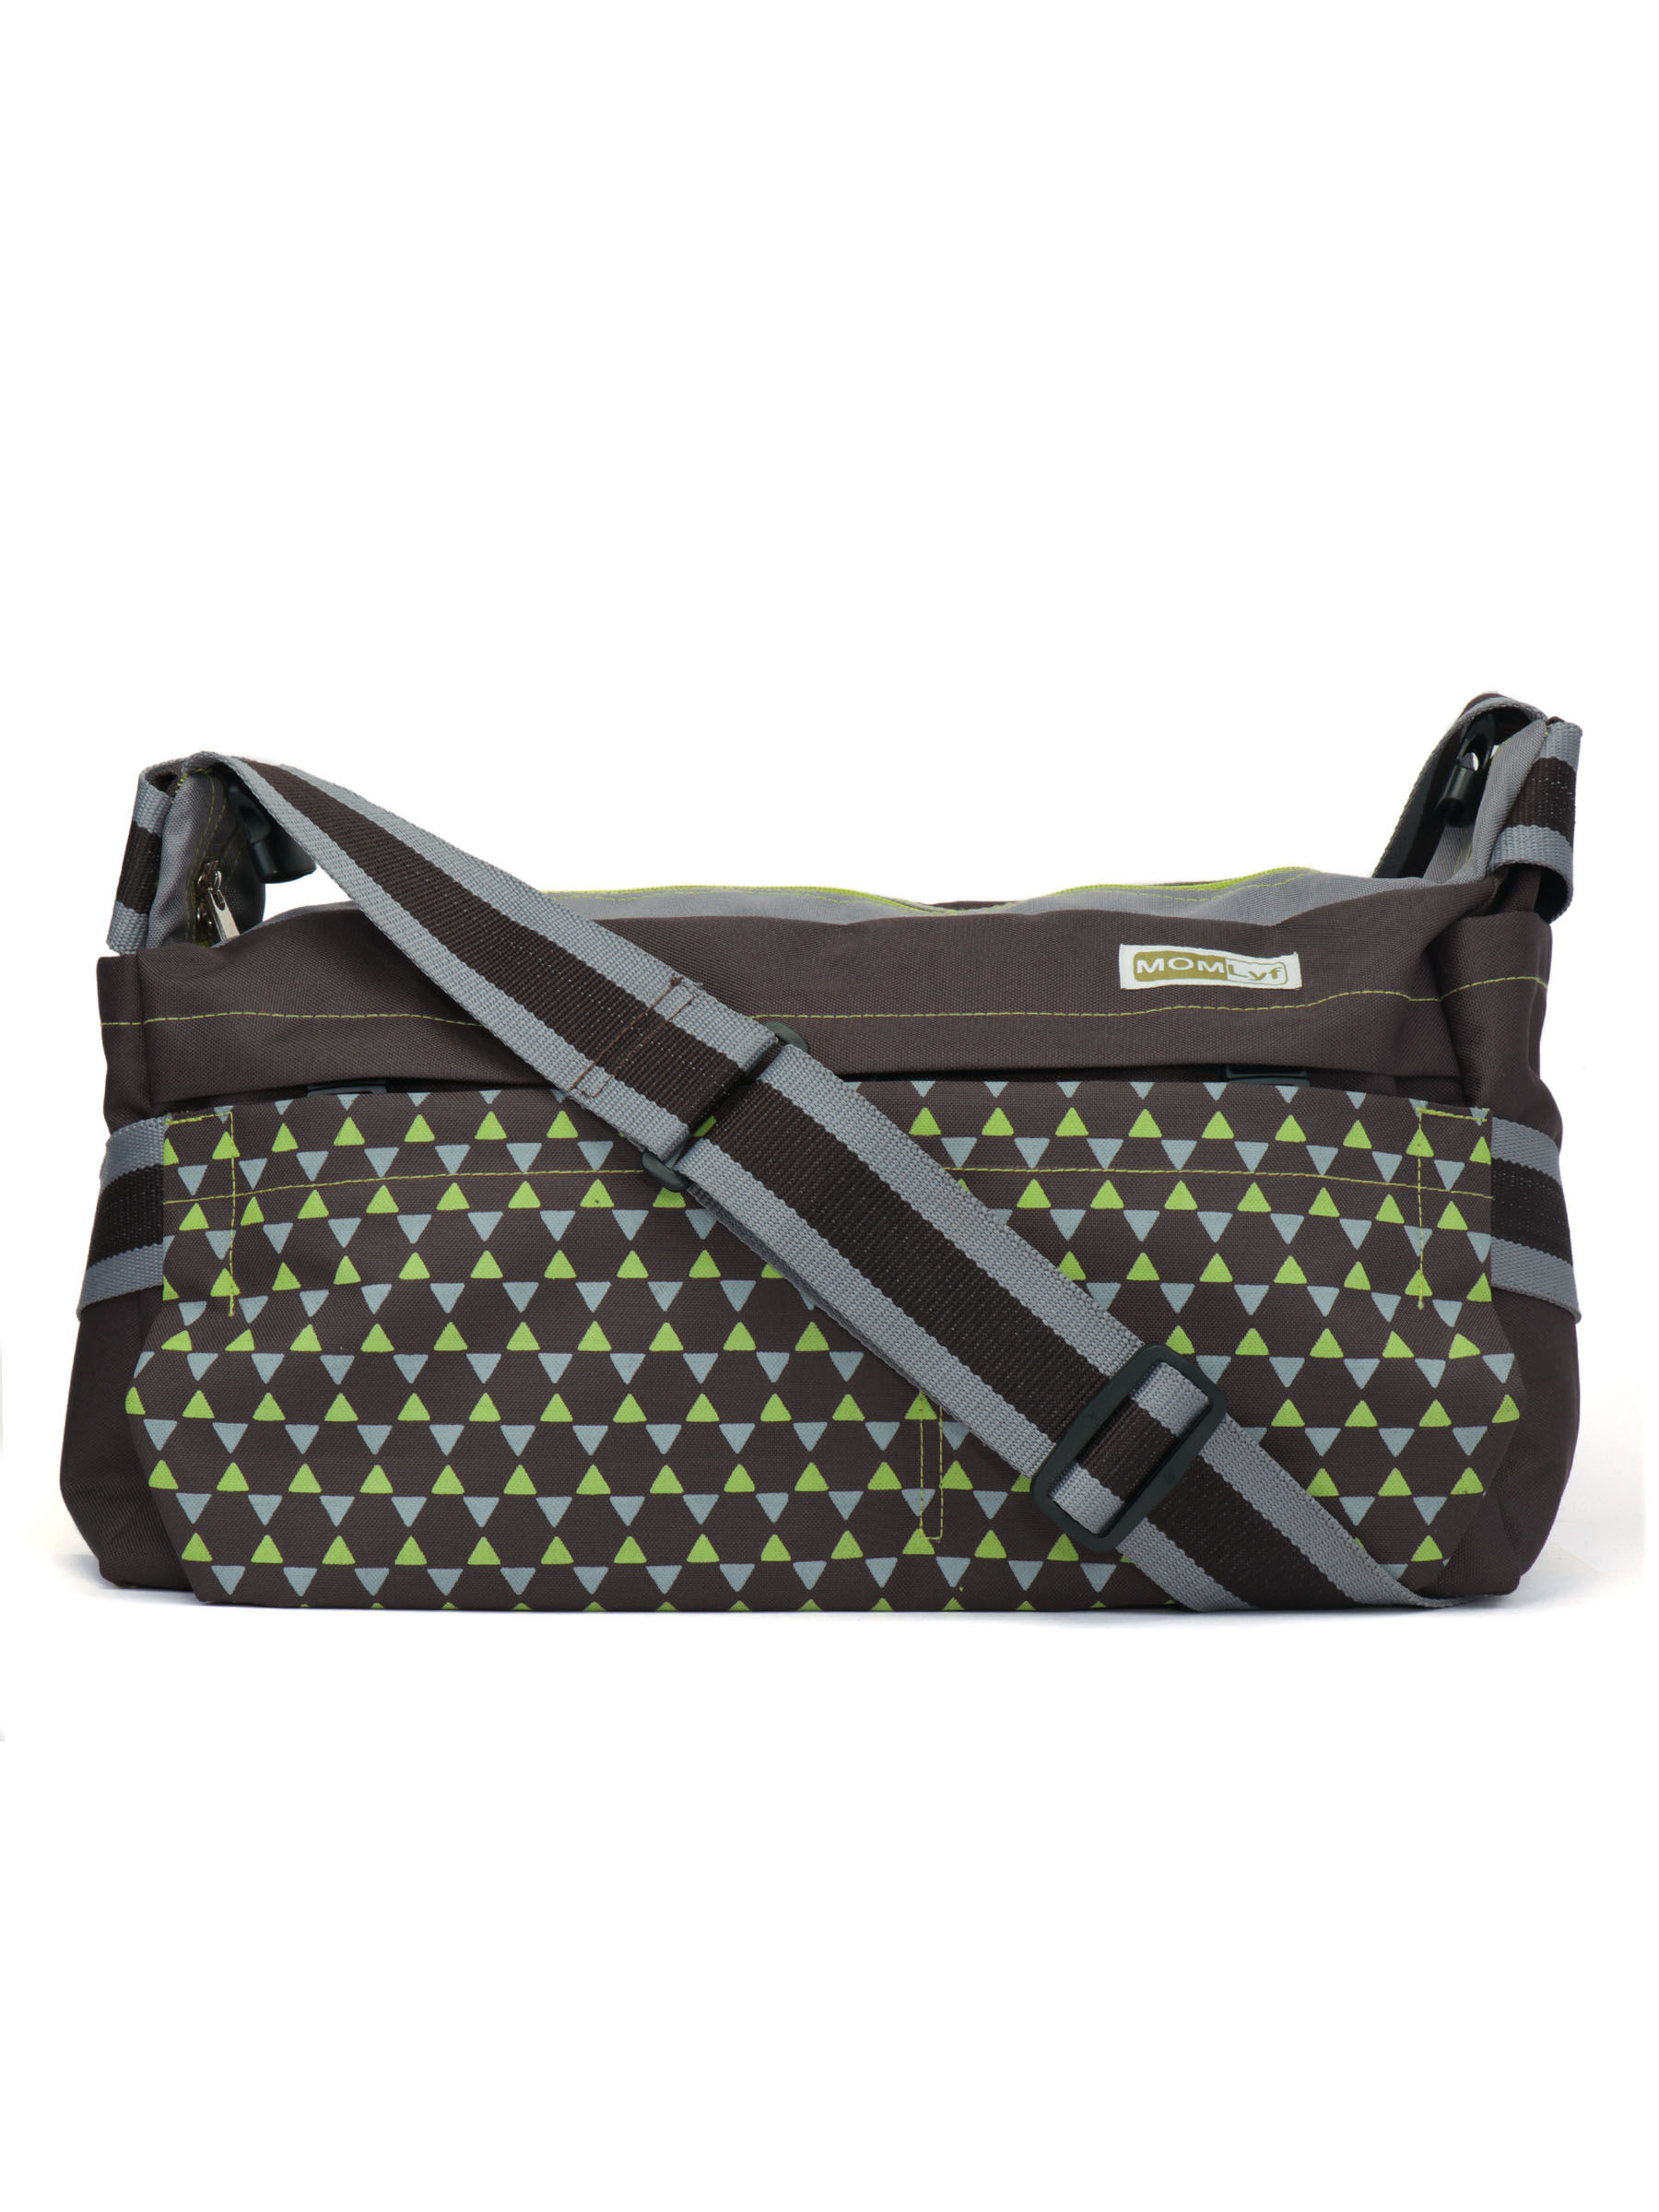 MomLyf Mia Brown And Green Printed Polyester Diaper Bag With Changing Mat And Bottle Cover